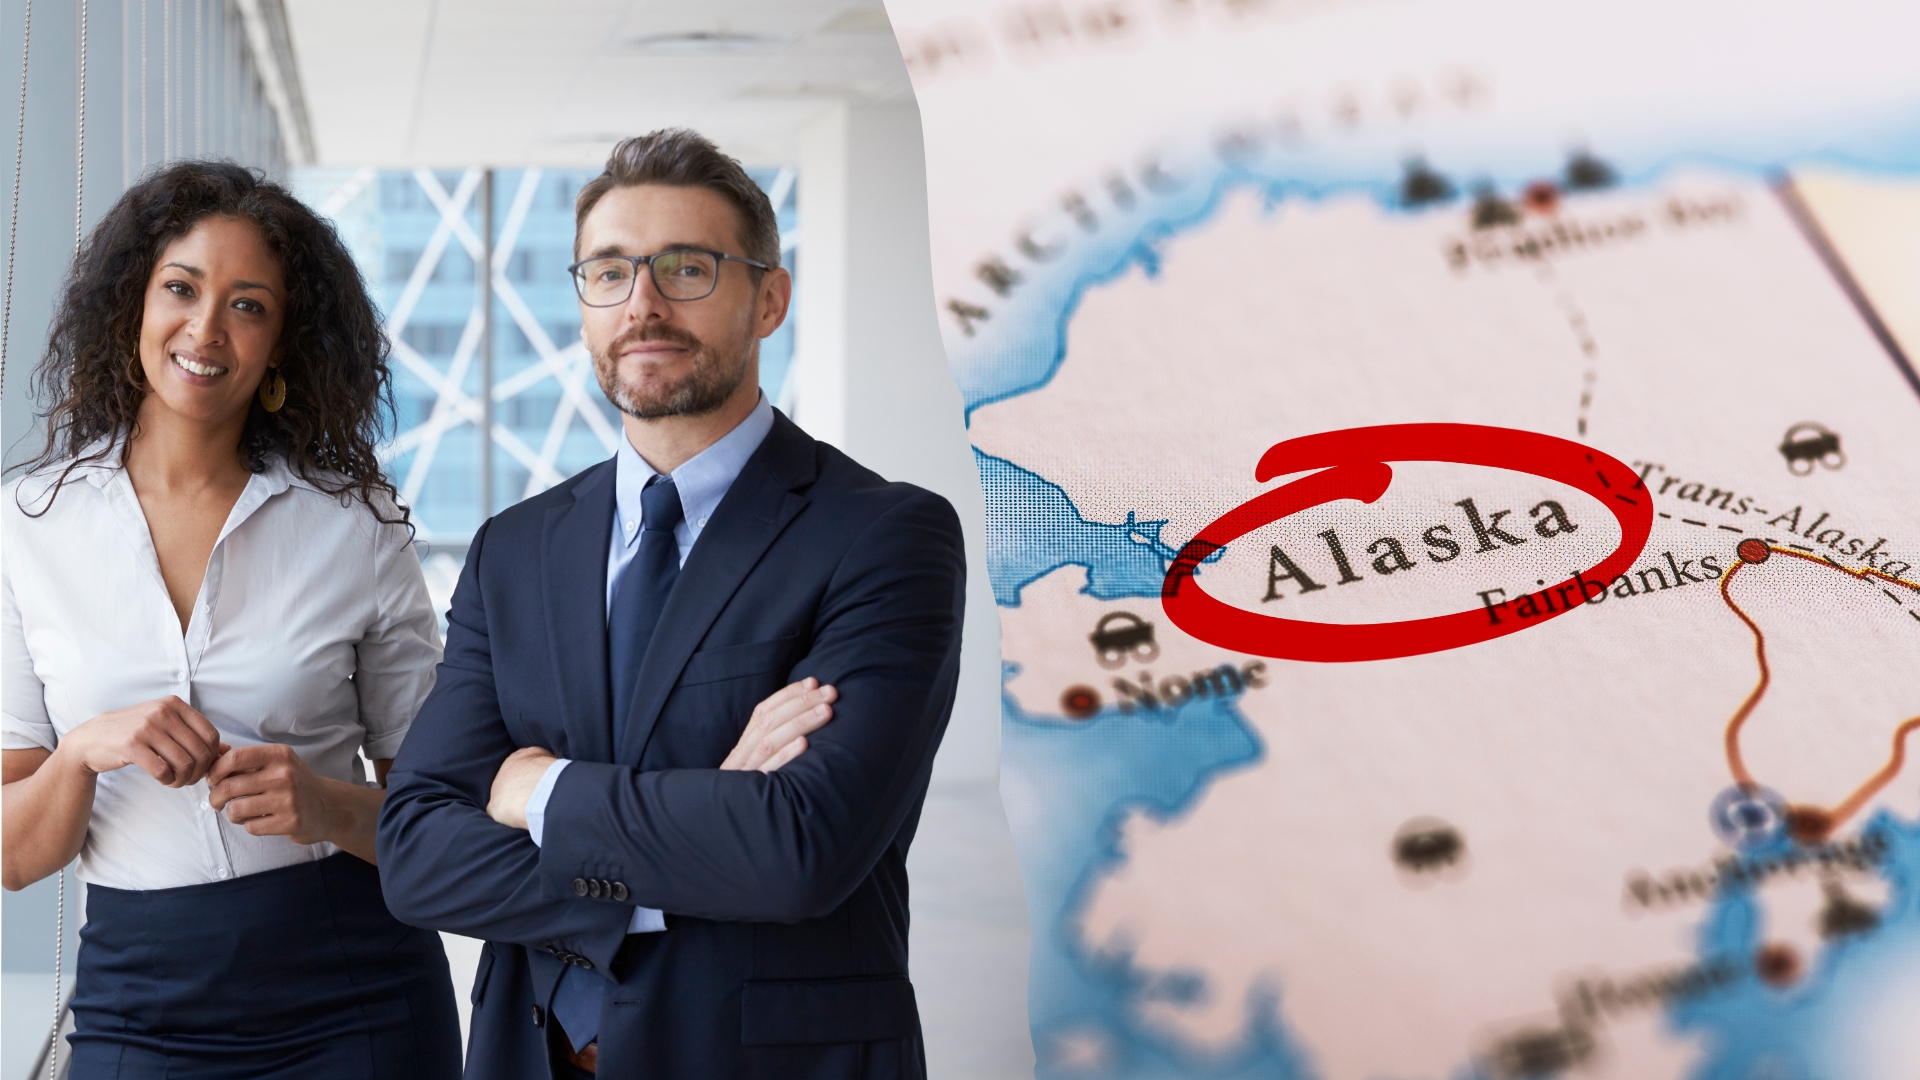 MBA Programs in Alaska - featured image